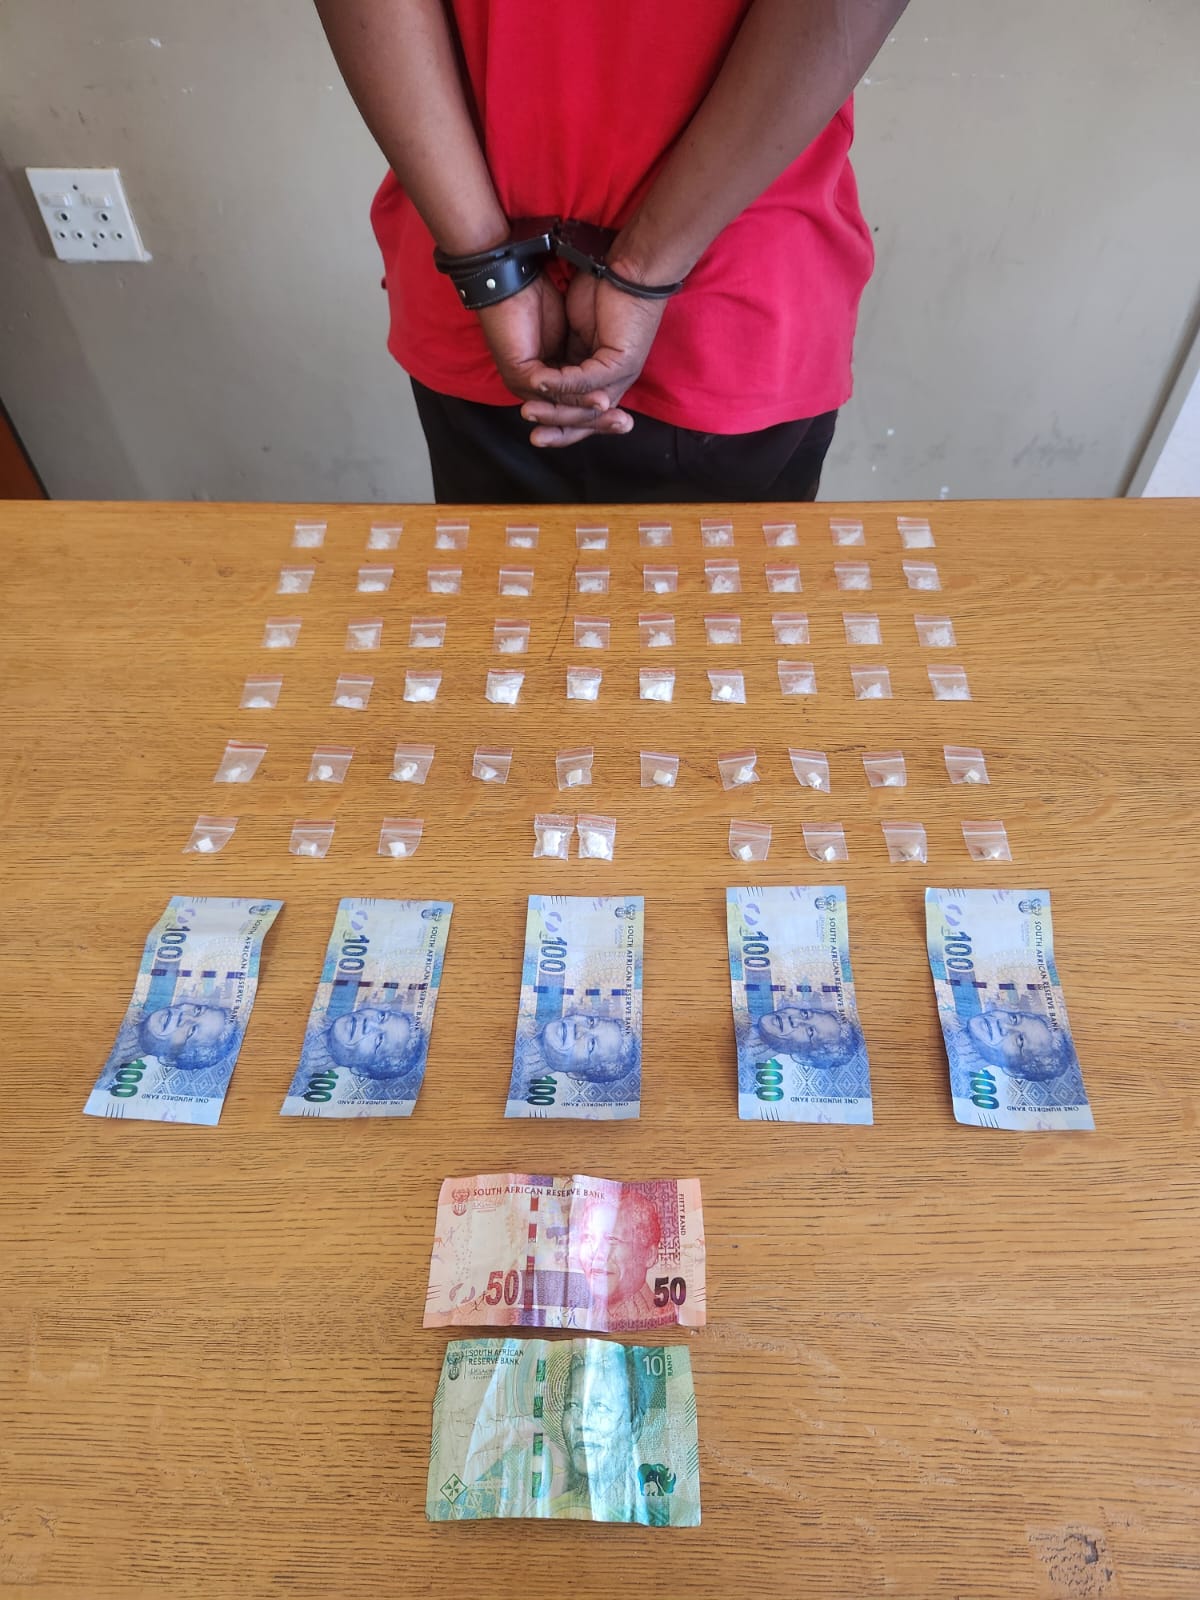 Three arrested for attempted murder, drugs and bribery in Thabong